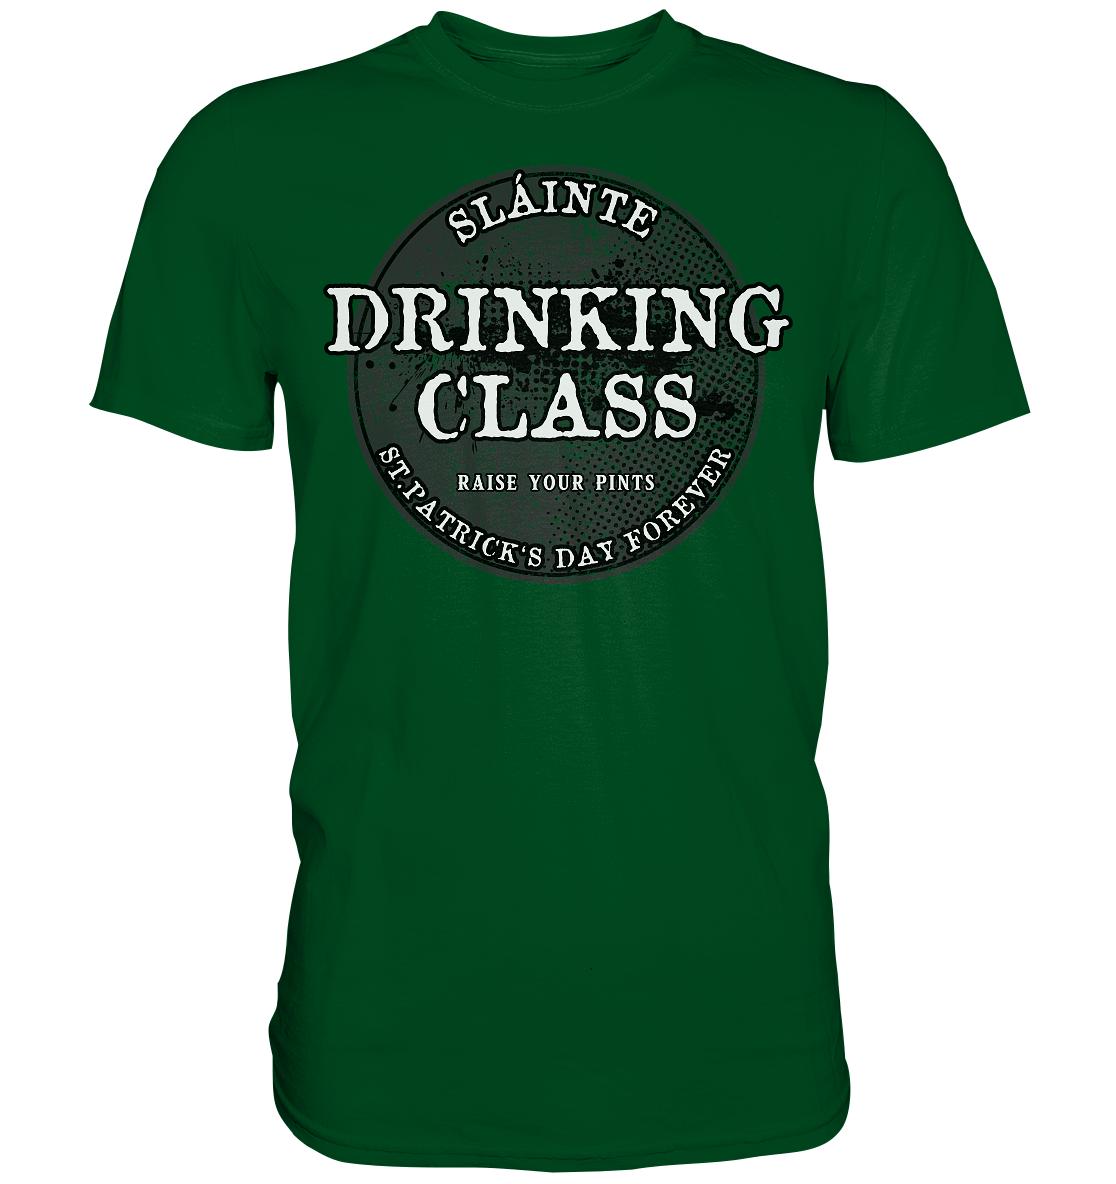 Drinking Class "St.Patrick's Day Forever" - Premium Shirt